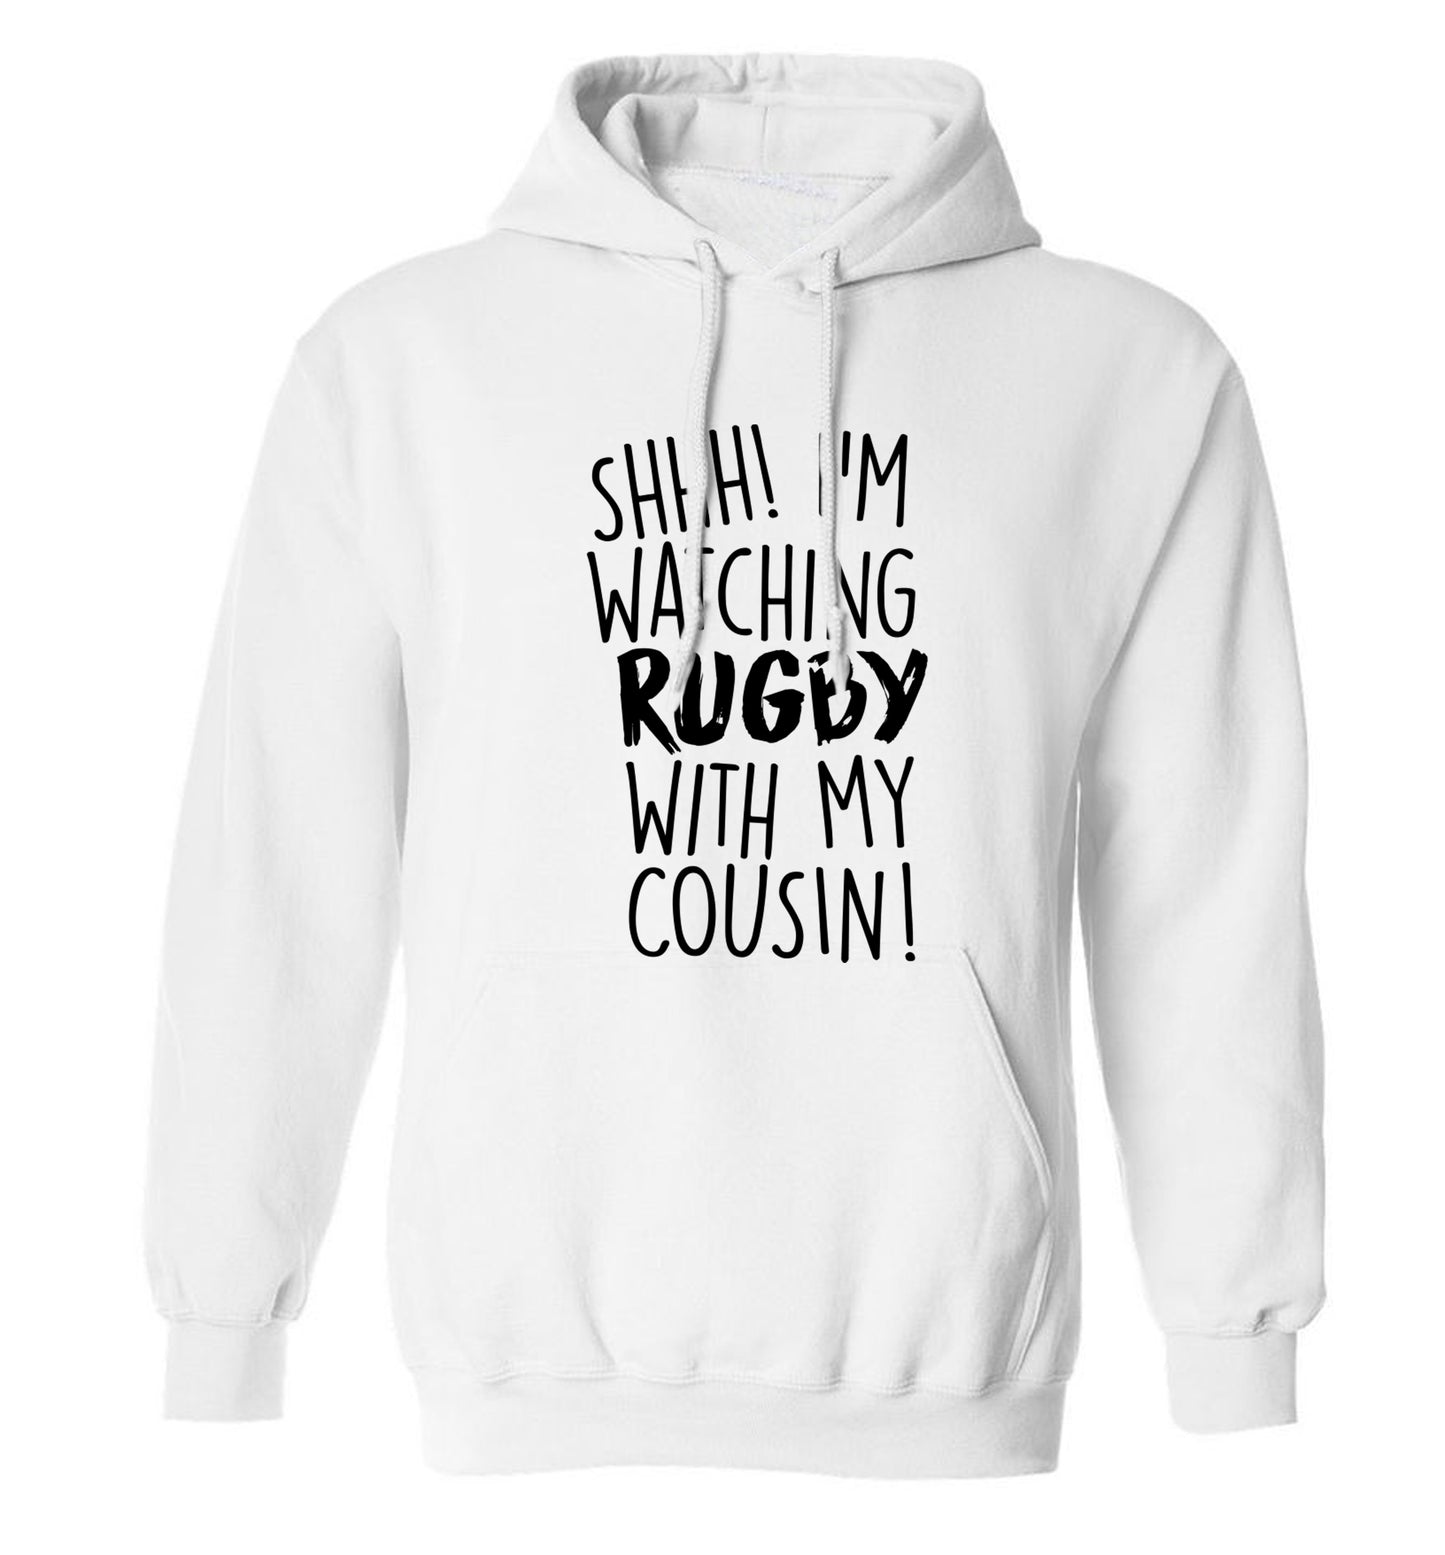 Shhh I'm watching rugby with my cousin adults unisex white hoodie 2XL